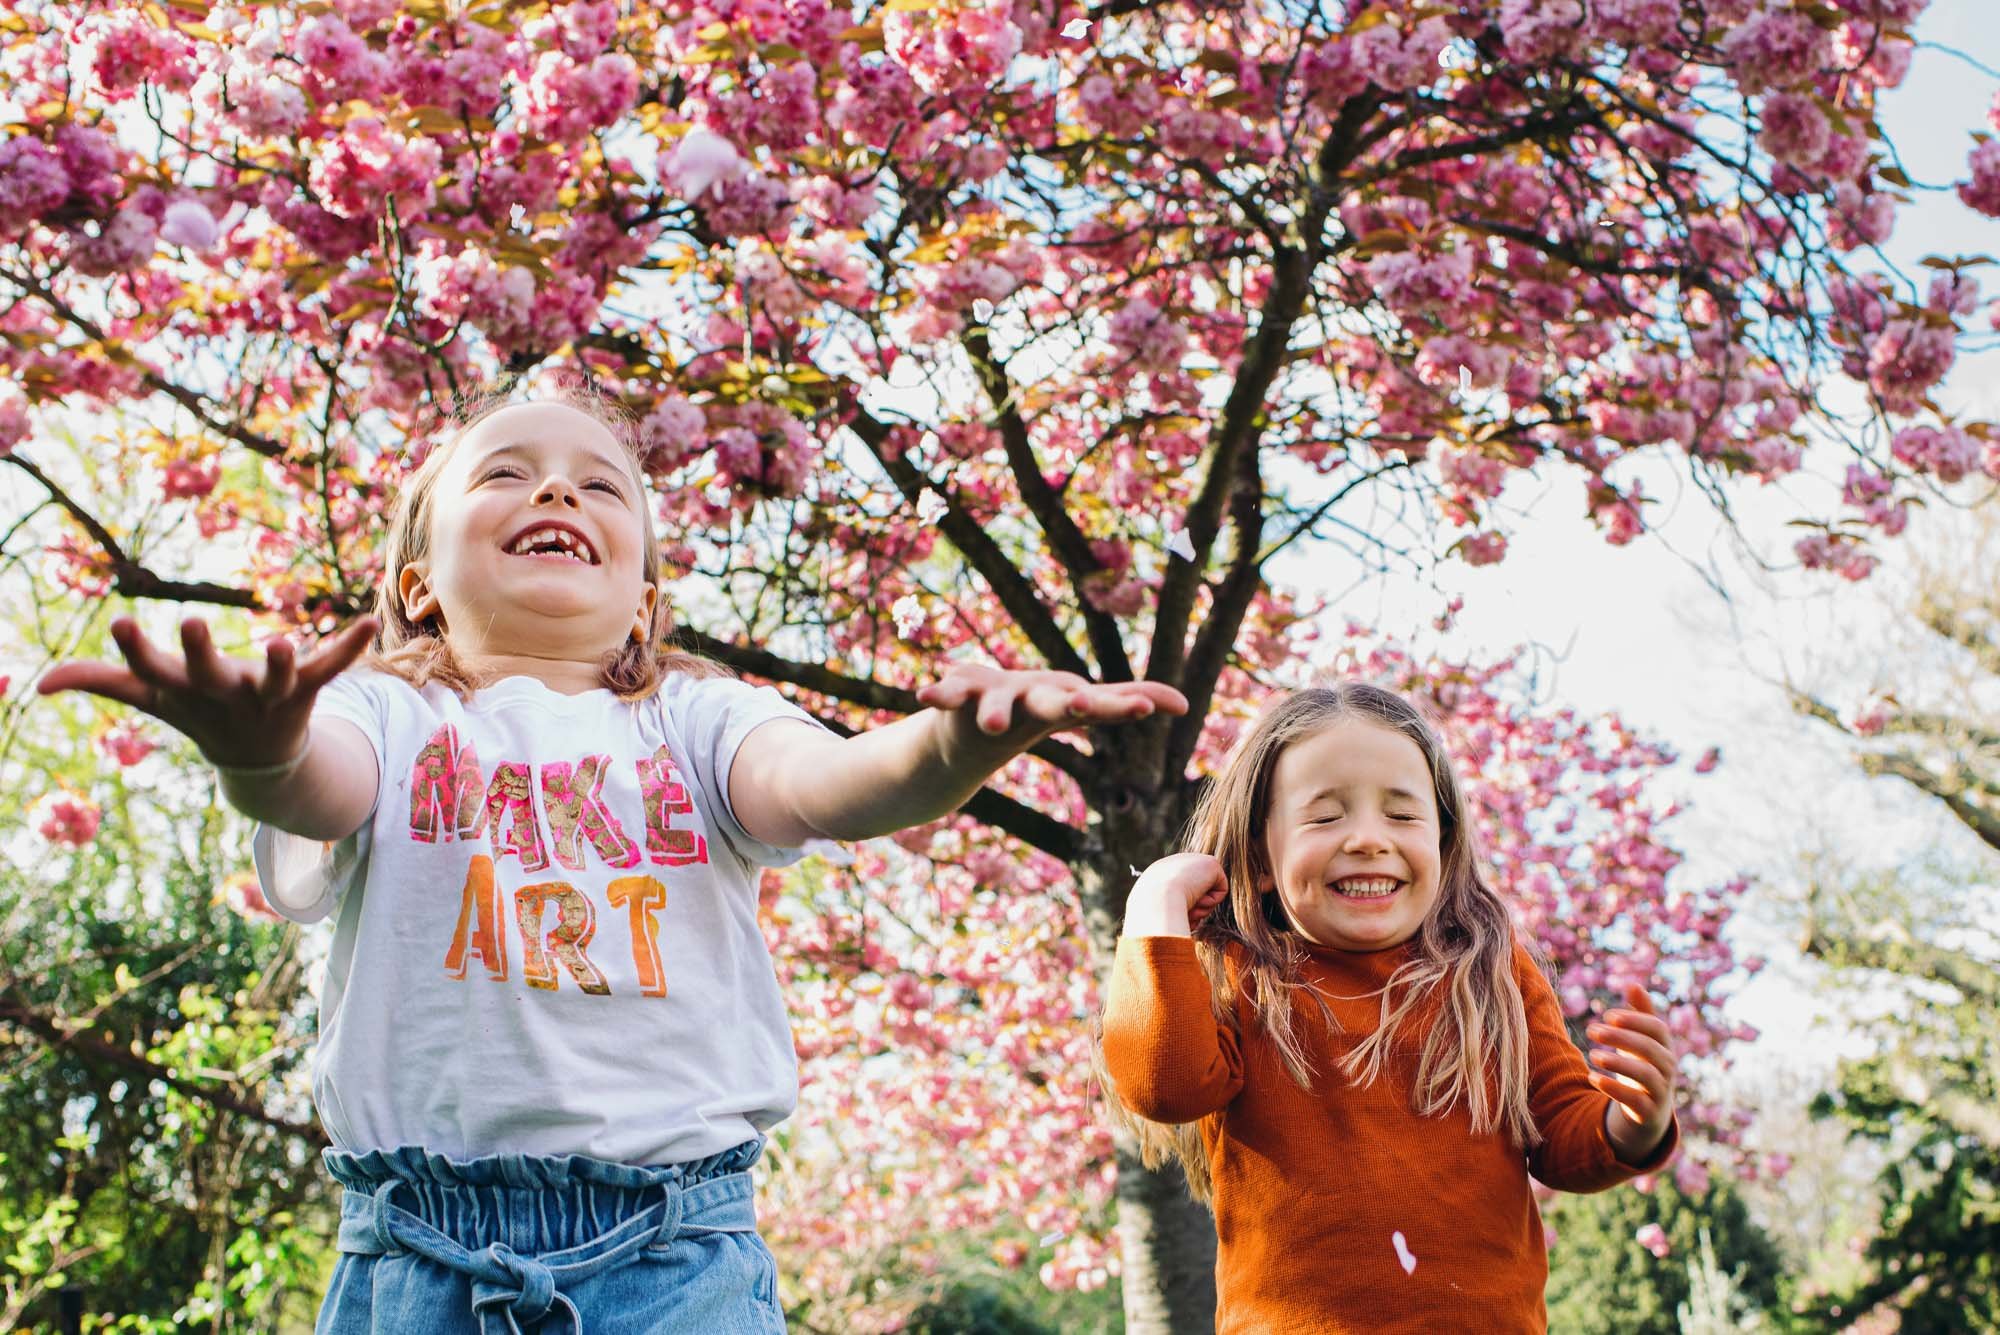 girls-throwing-blossom0in-the-air-unposed-family-photography-dulwich-peckham-rye-park-london-south-east.jpg